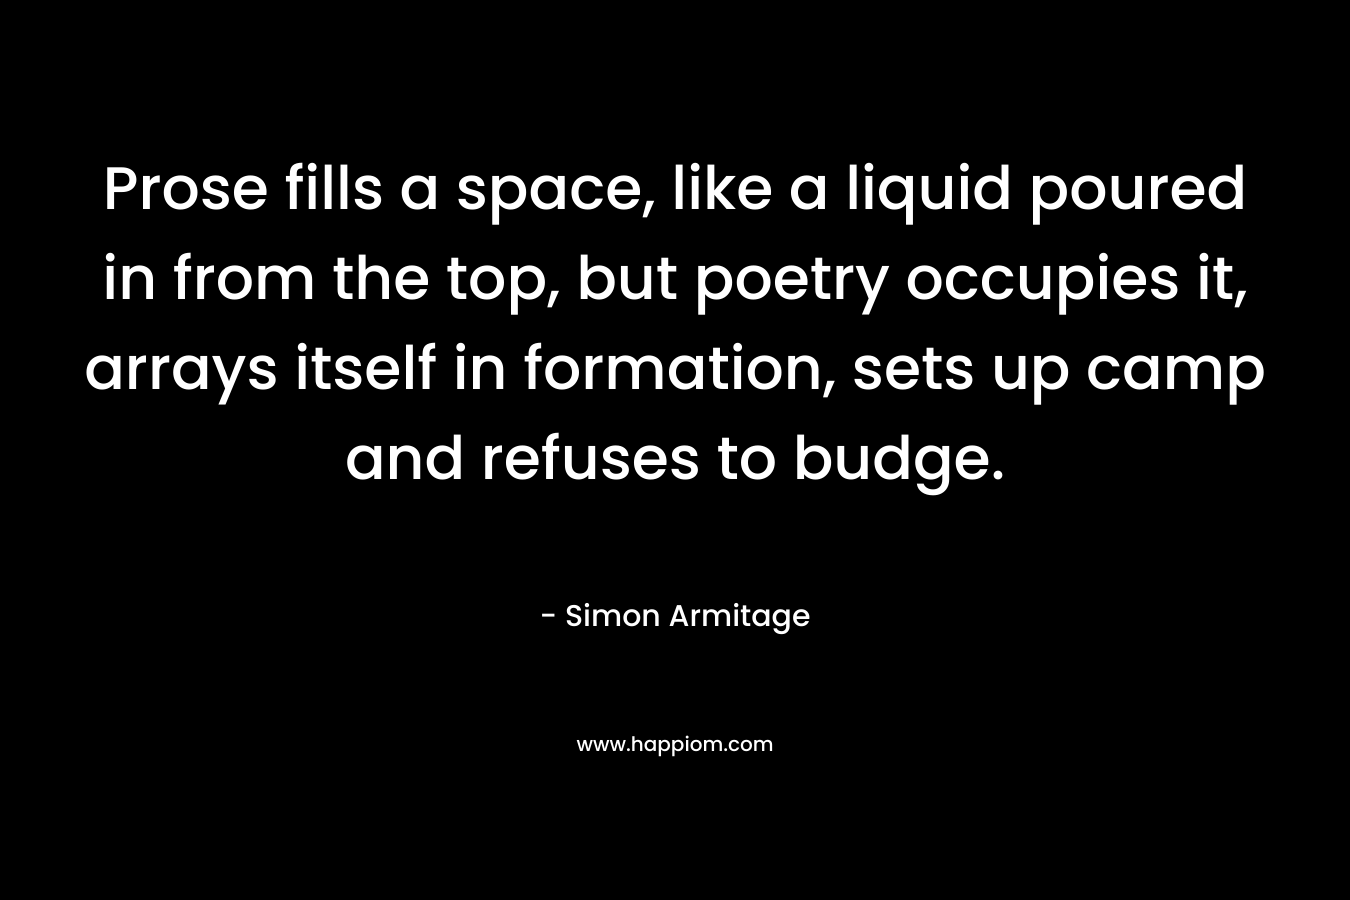 Prose fills a space, like a liquid poured in from the top, but poetry occupies it, arrays itself in formation, sets up camp and refuses to budge.